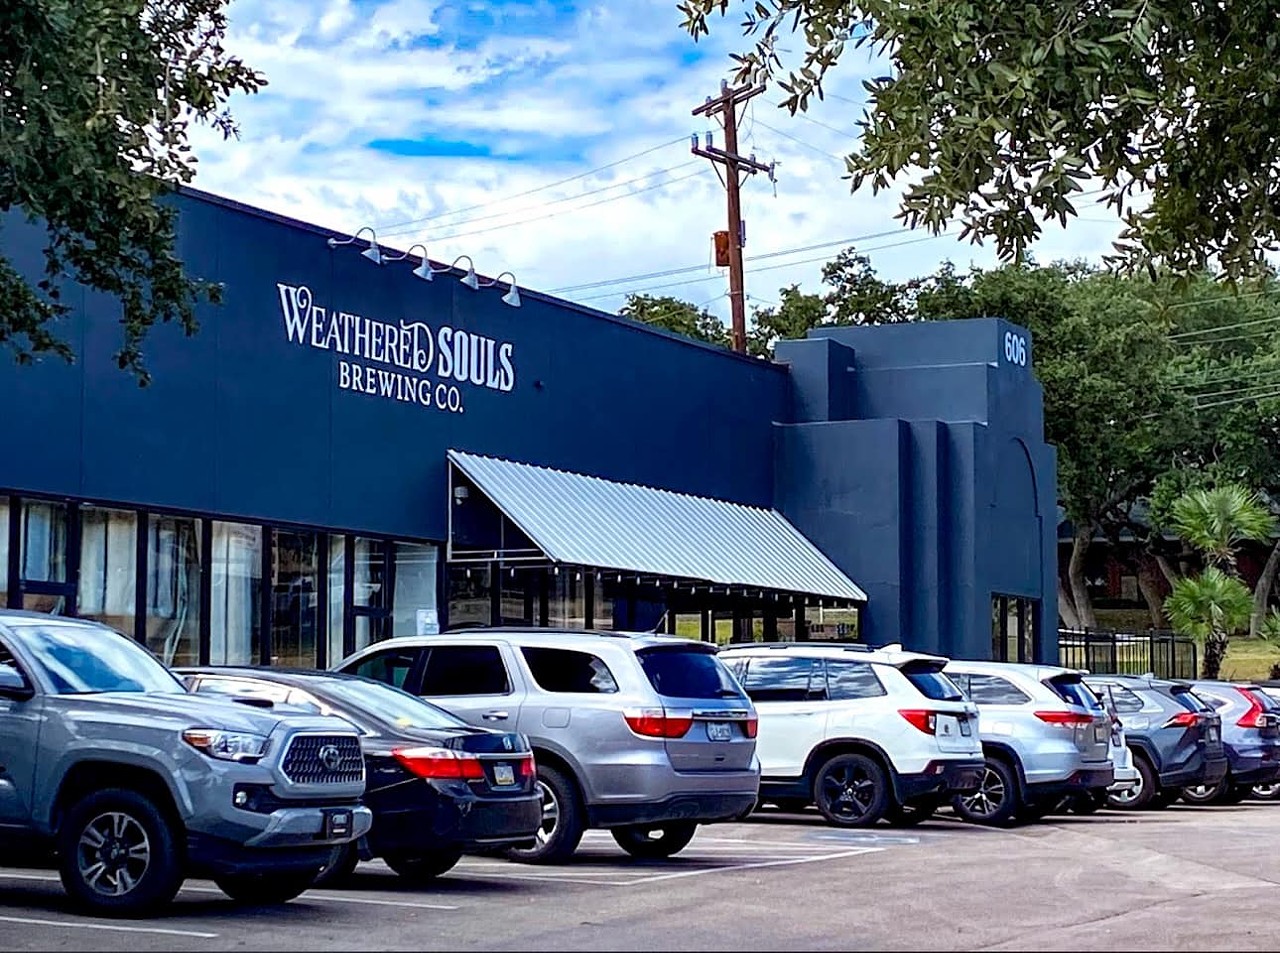 Weathered Souls Brewing Co.
606 Embassy Oaks - Suite 500, (210) 274-6824, weatheredsouls.beer Weathered Souls is an LGBTQIA-friendly brewery that's proud to pour local brews made from local grains. Quench your thirst with one of the taproom's endlessly creative craft beers.